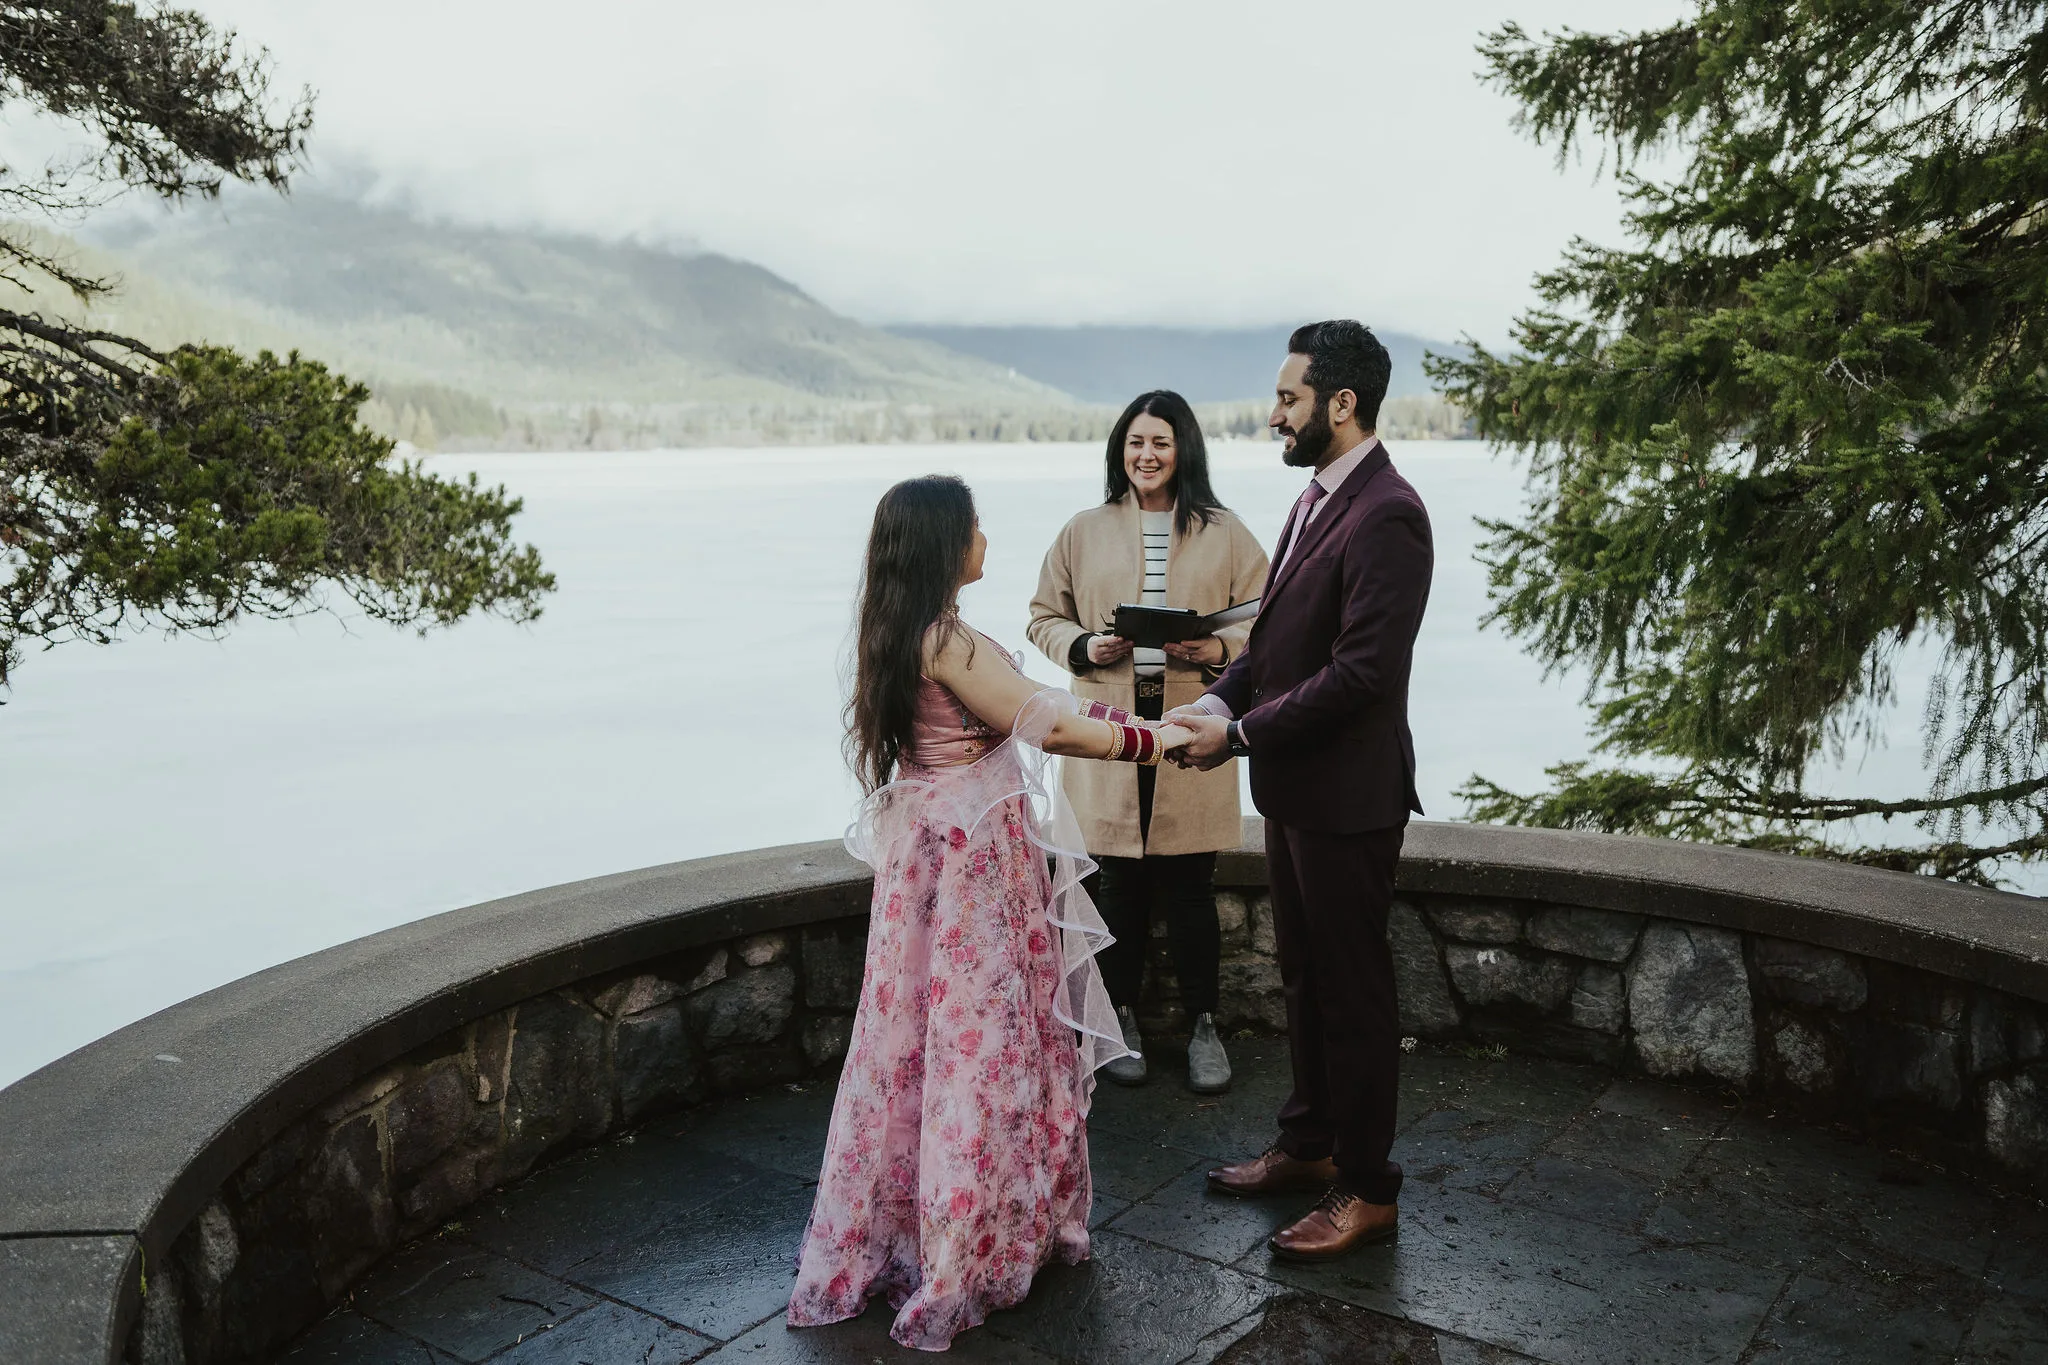 Young Hip & Married wedding officiant Erika Enns officiating a Whistler Elopement with a couple in the Stone Circle